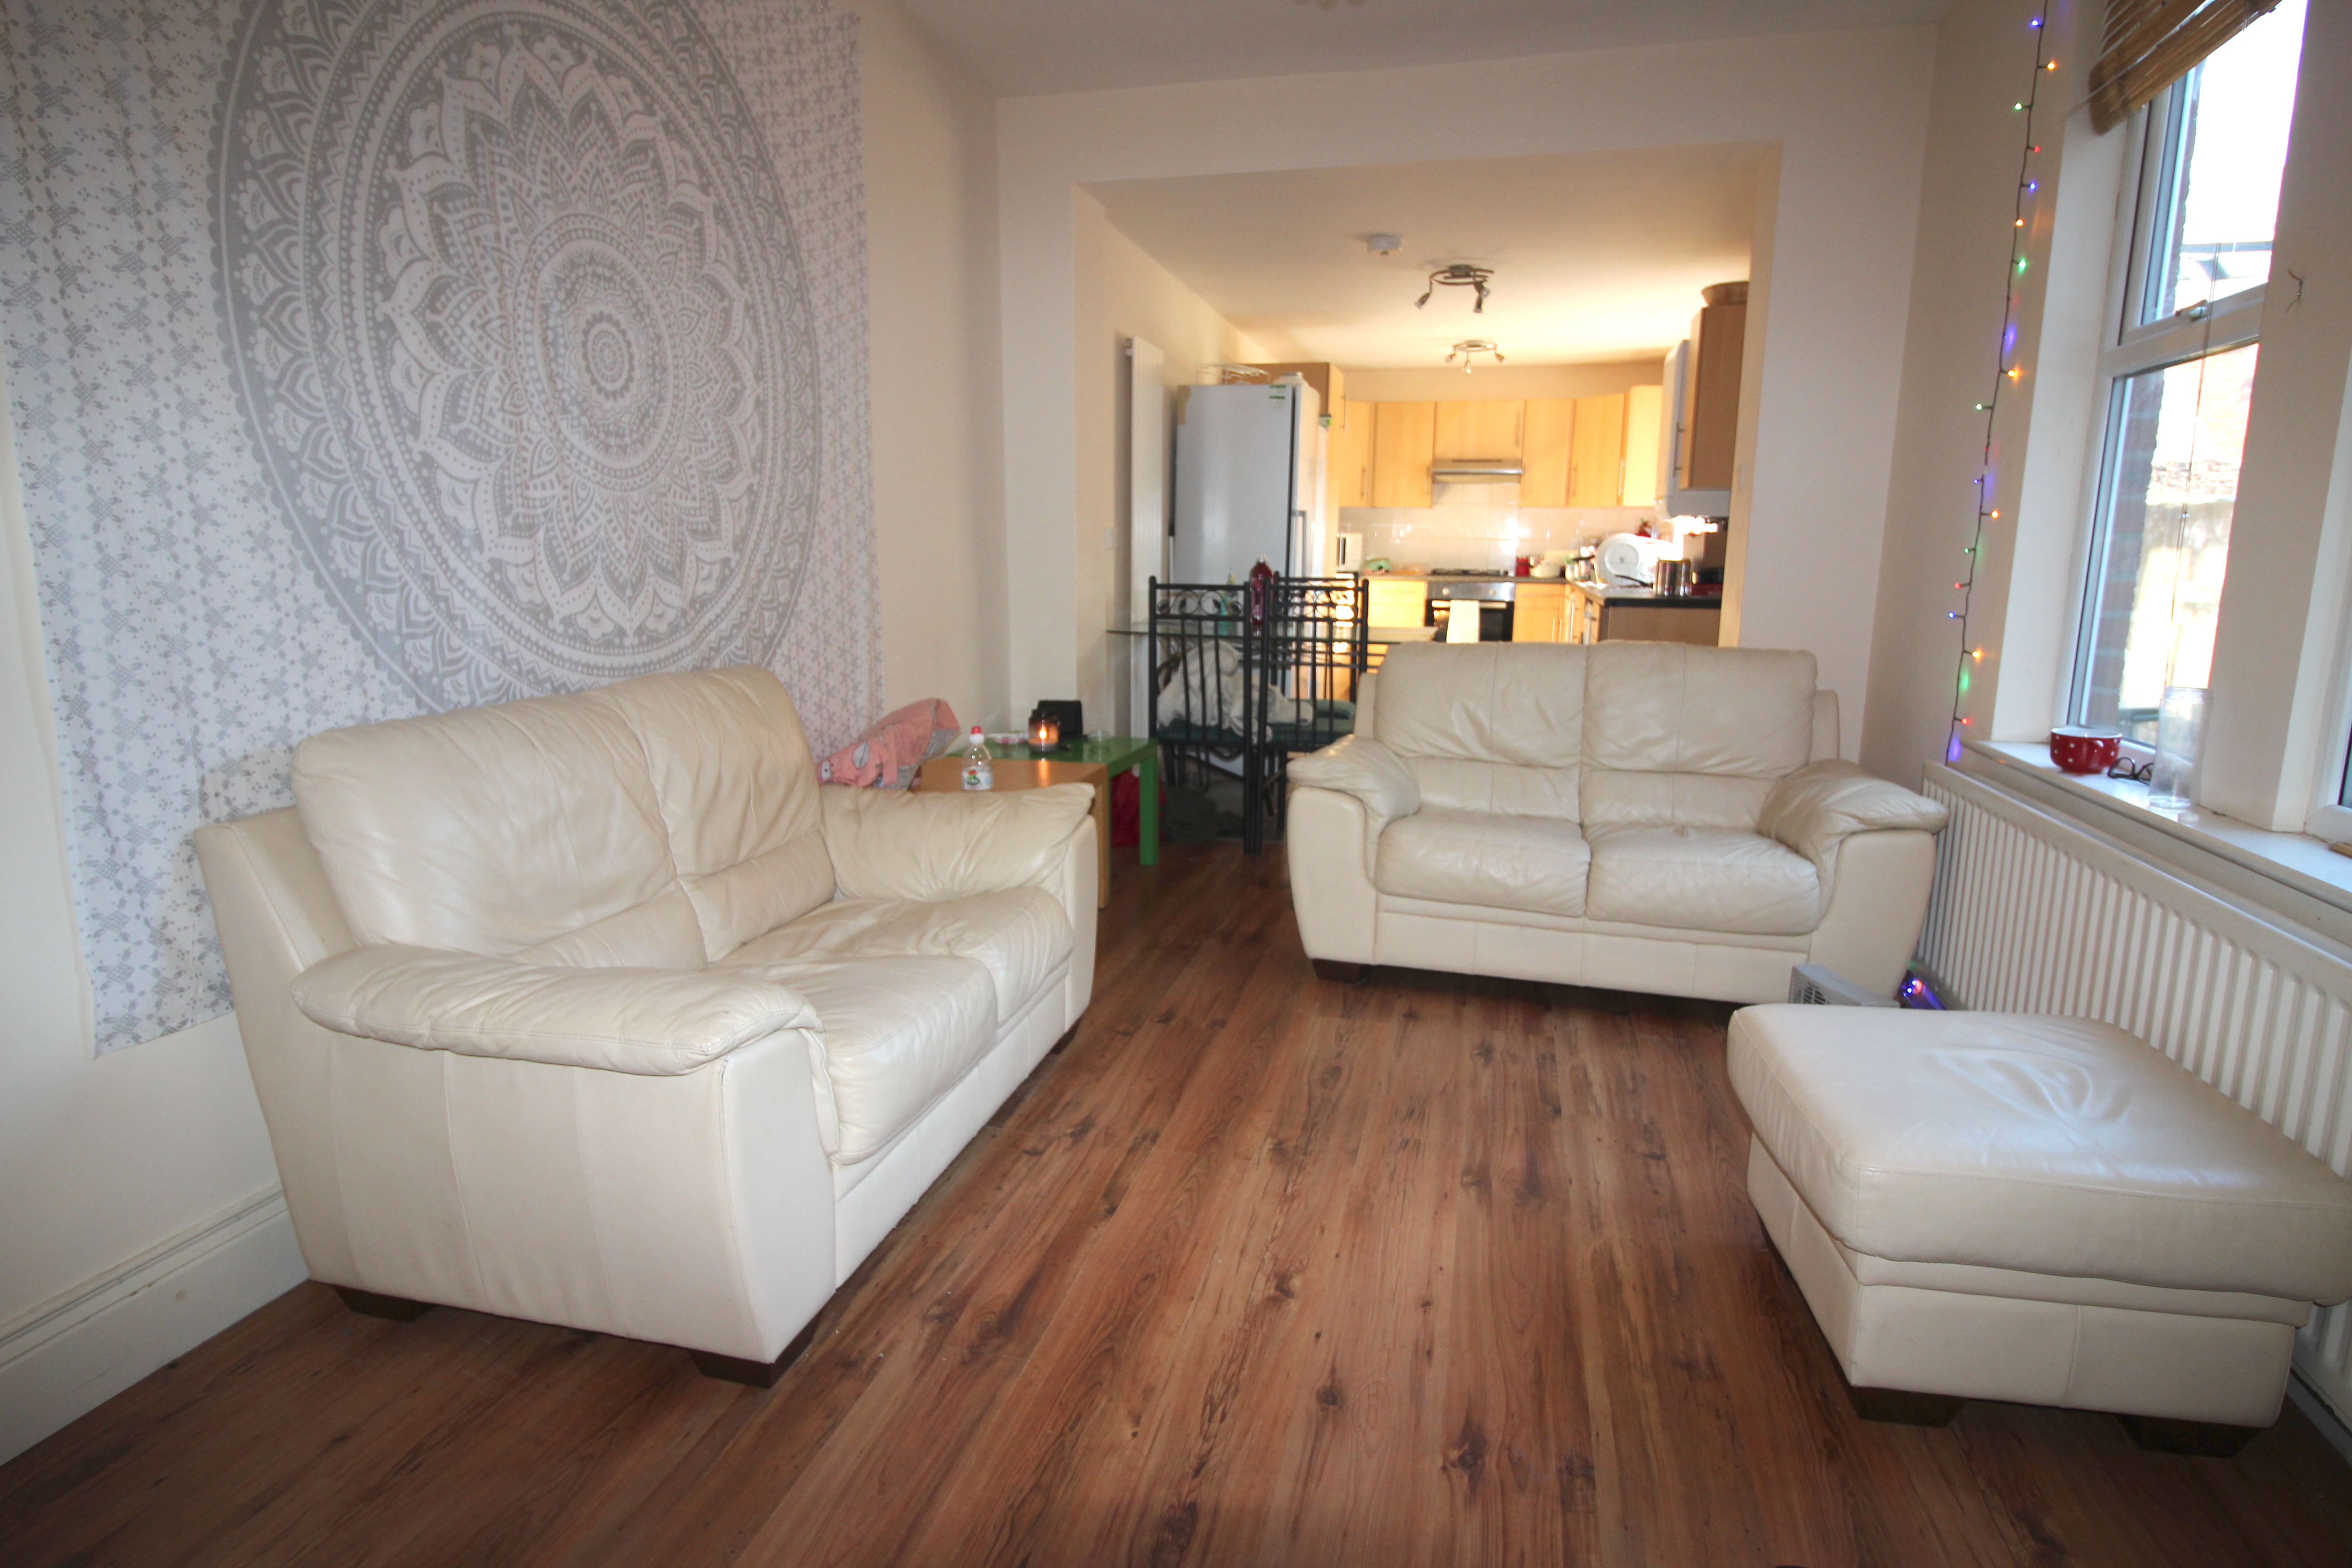 6 Bed Student House, Manor House Rd @ £110.00 PPPW